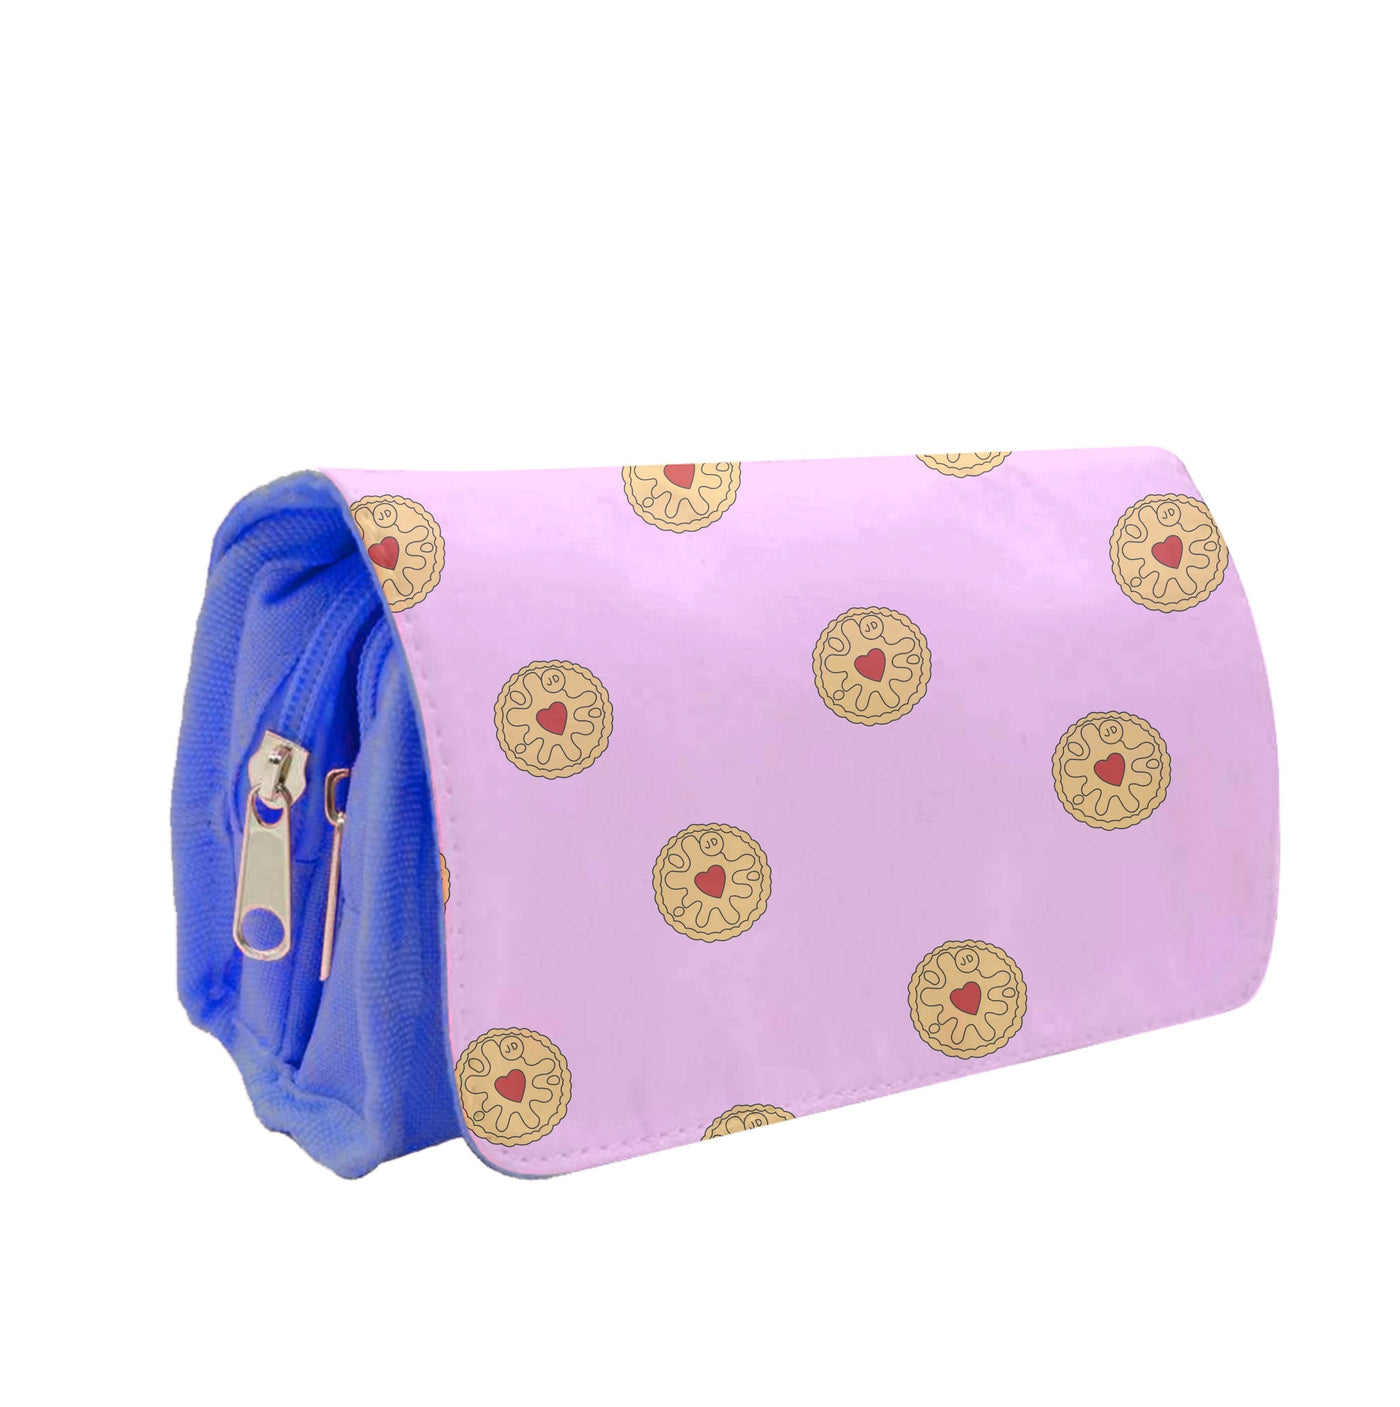 Jammy Doggers - Biscuits Patterns Pencil Case